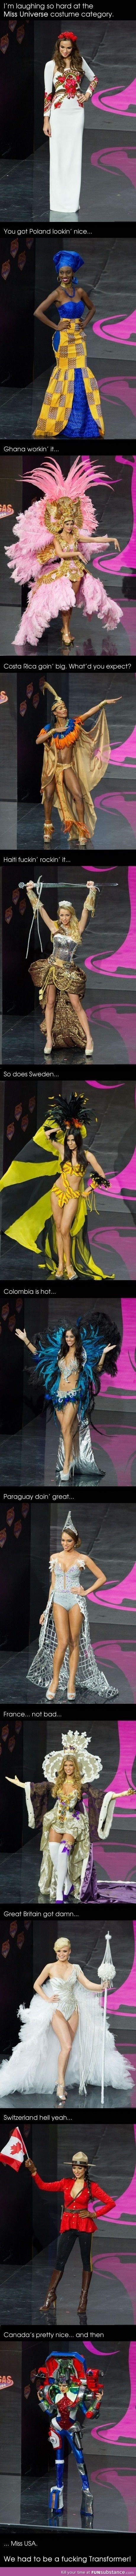 Miss Universe costume category... wait for it...